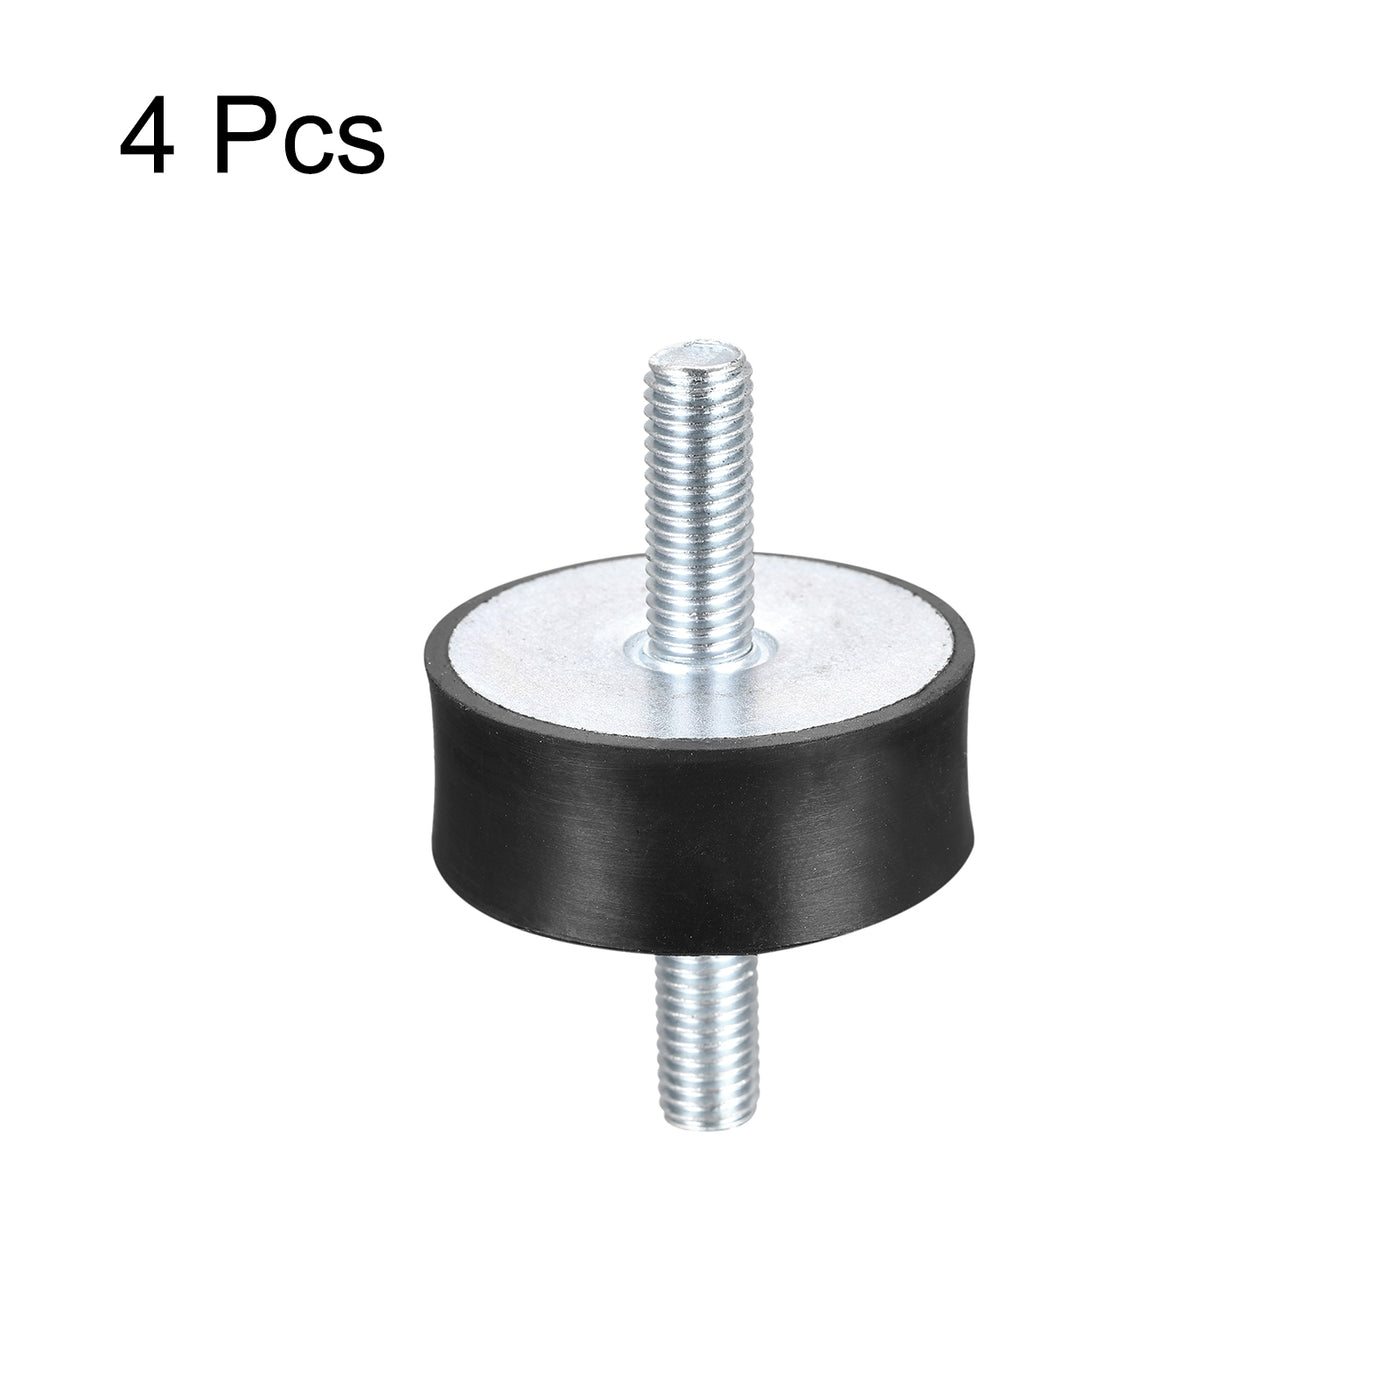 uxcell Uxcell Rubber Mounts 4pcs M10x28mm Male Vibration Isolator Shock Absorber D50mmxH20mm